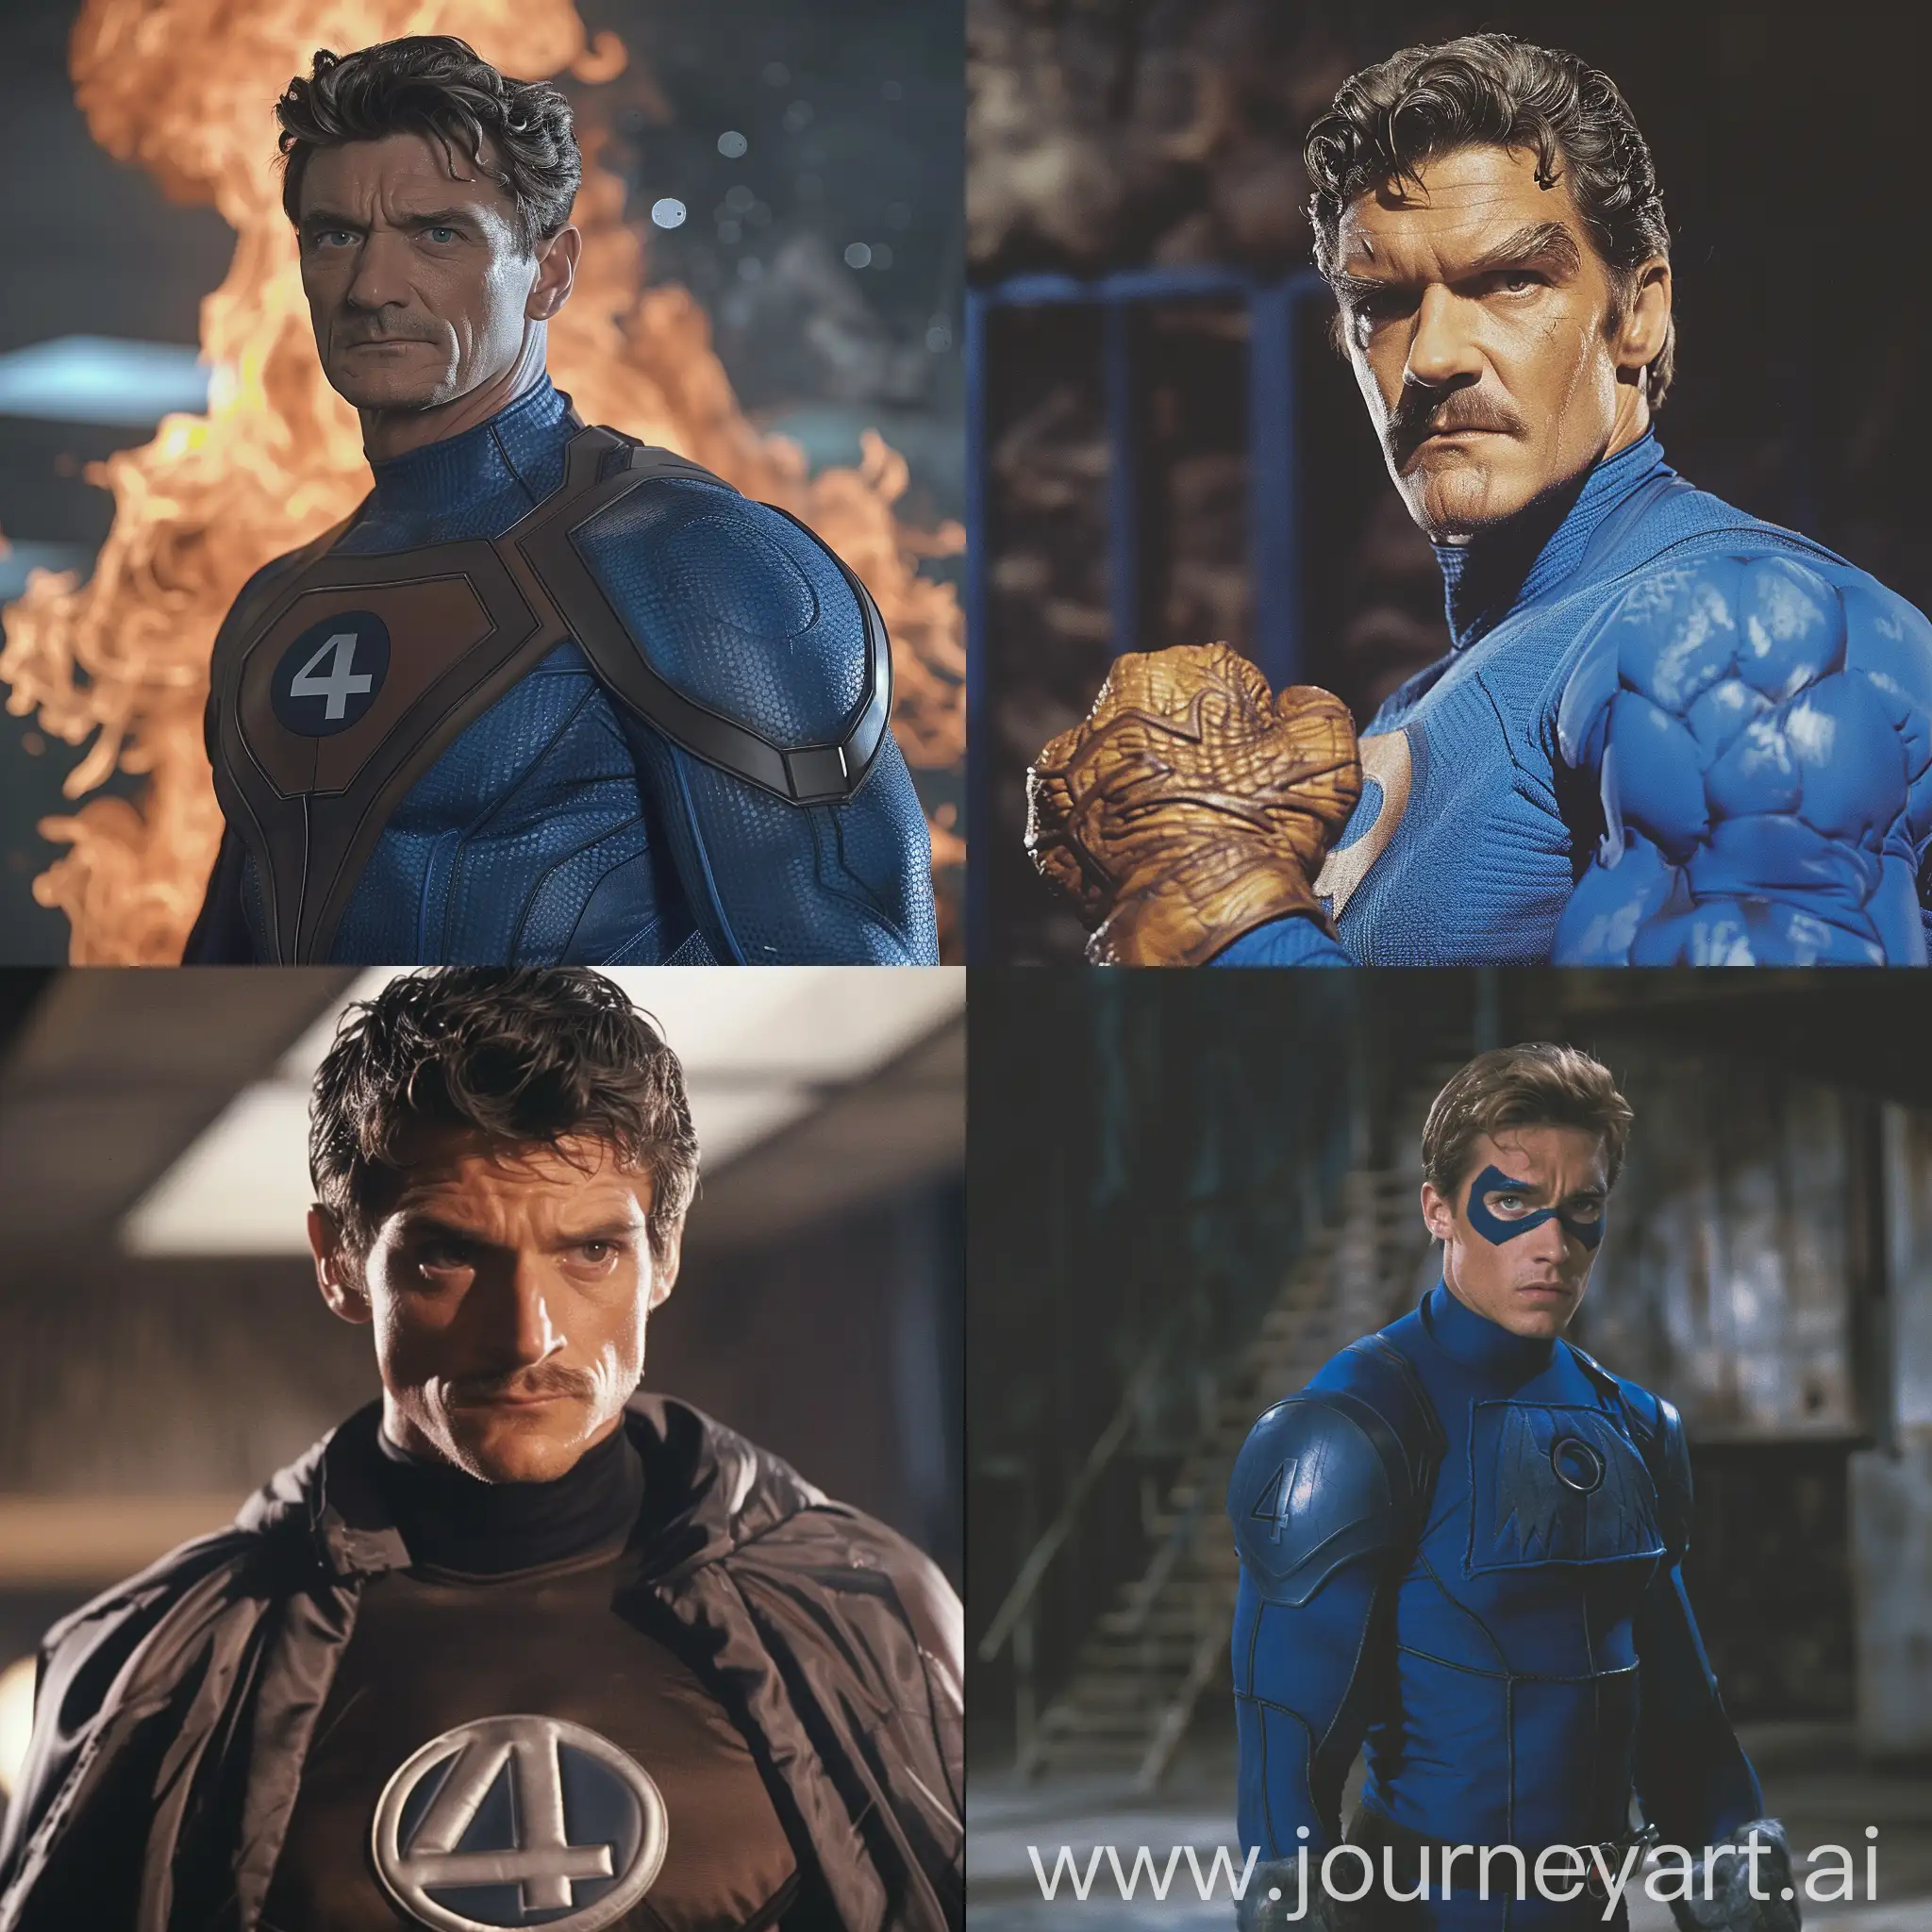 Pedro Pascal as Mr Fantastic  in Fantastic 4 genre film, dvd screenshot from marvel film, superhero costume and 80s anime film composition